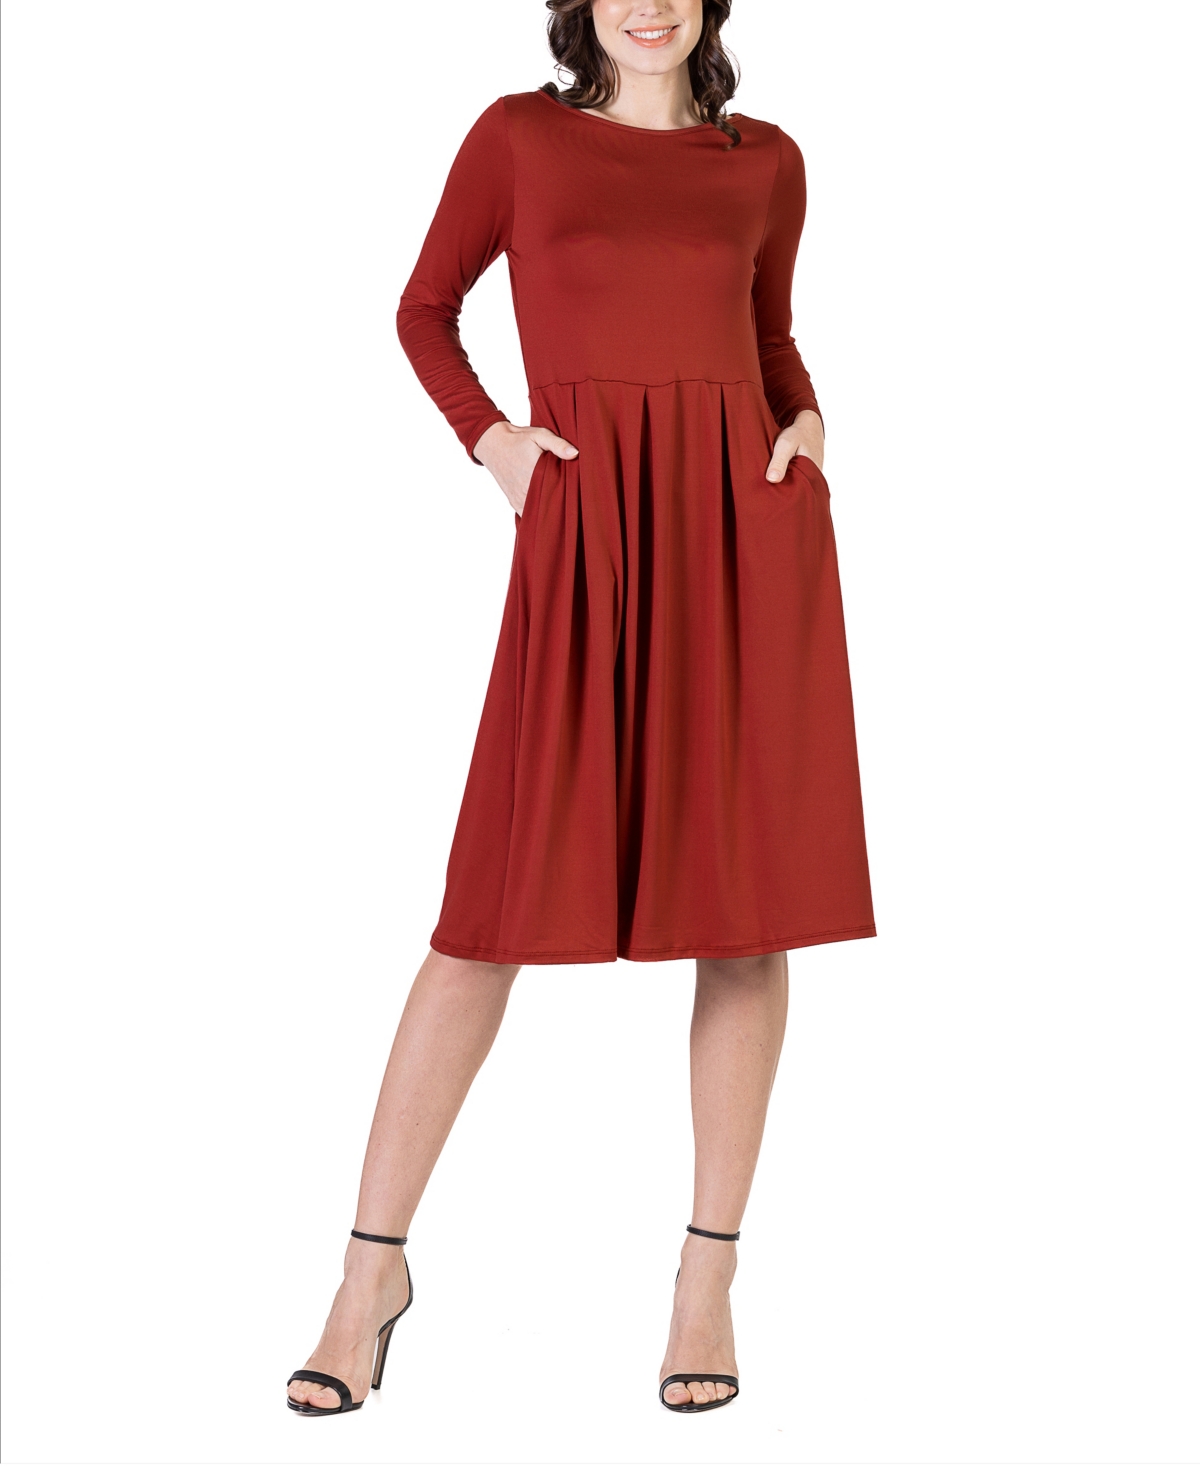 24seven Comfort Apparel Women's Midi Length Fit And Flare Dress In Rust